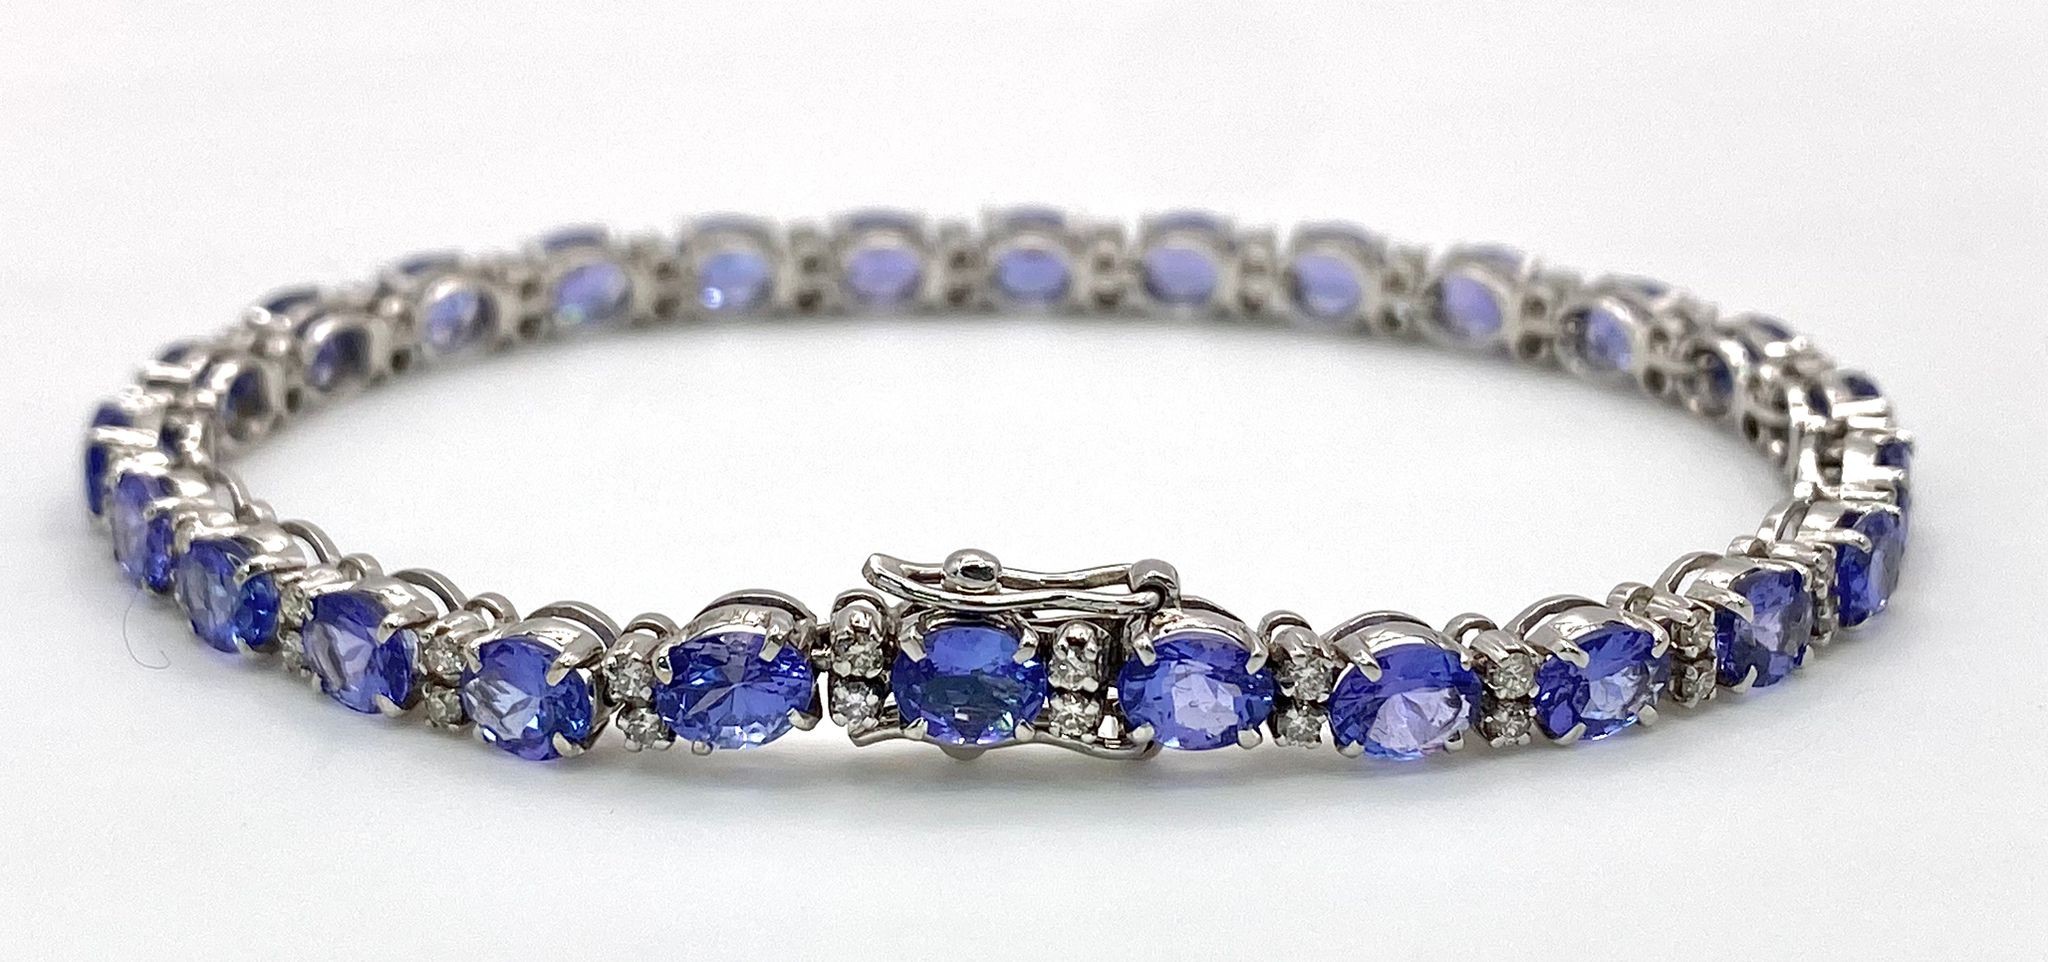 A spectacular 18 K white gold bracelet with oval cut tanzanite gems and round cut diamonds. - Image 8 of 16